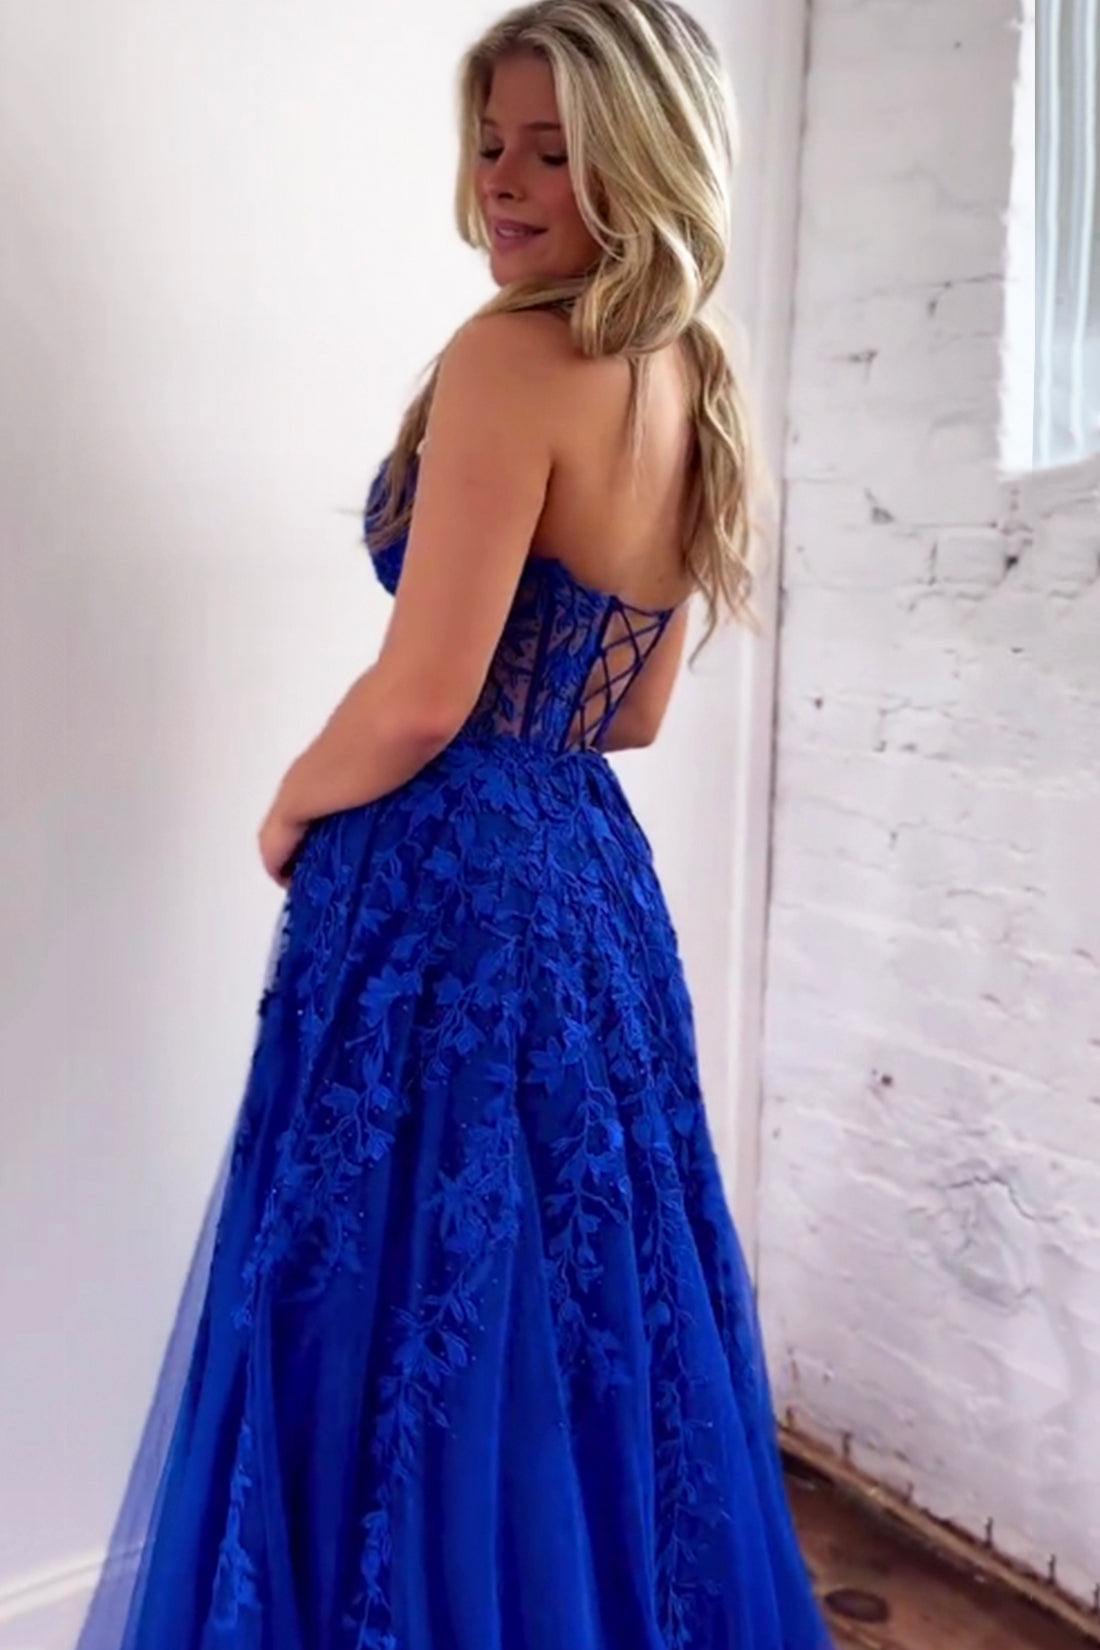 Cute A Line Sweetheart Royal Blue Tulle Long Prom Dresses with Lace